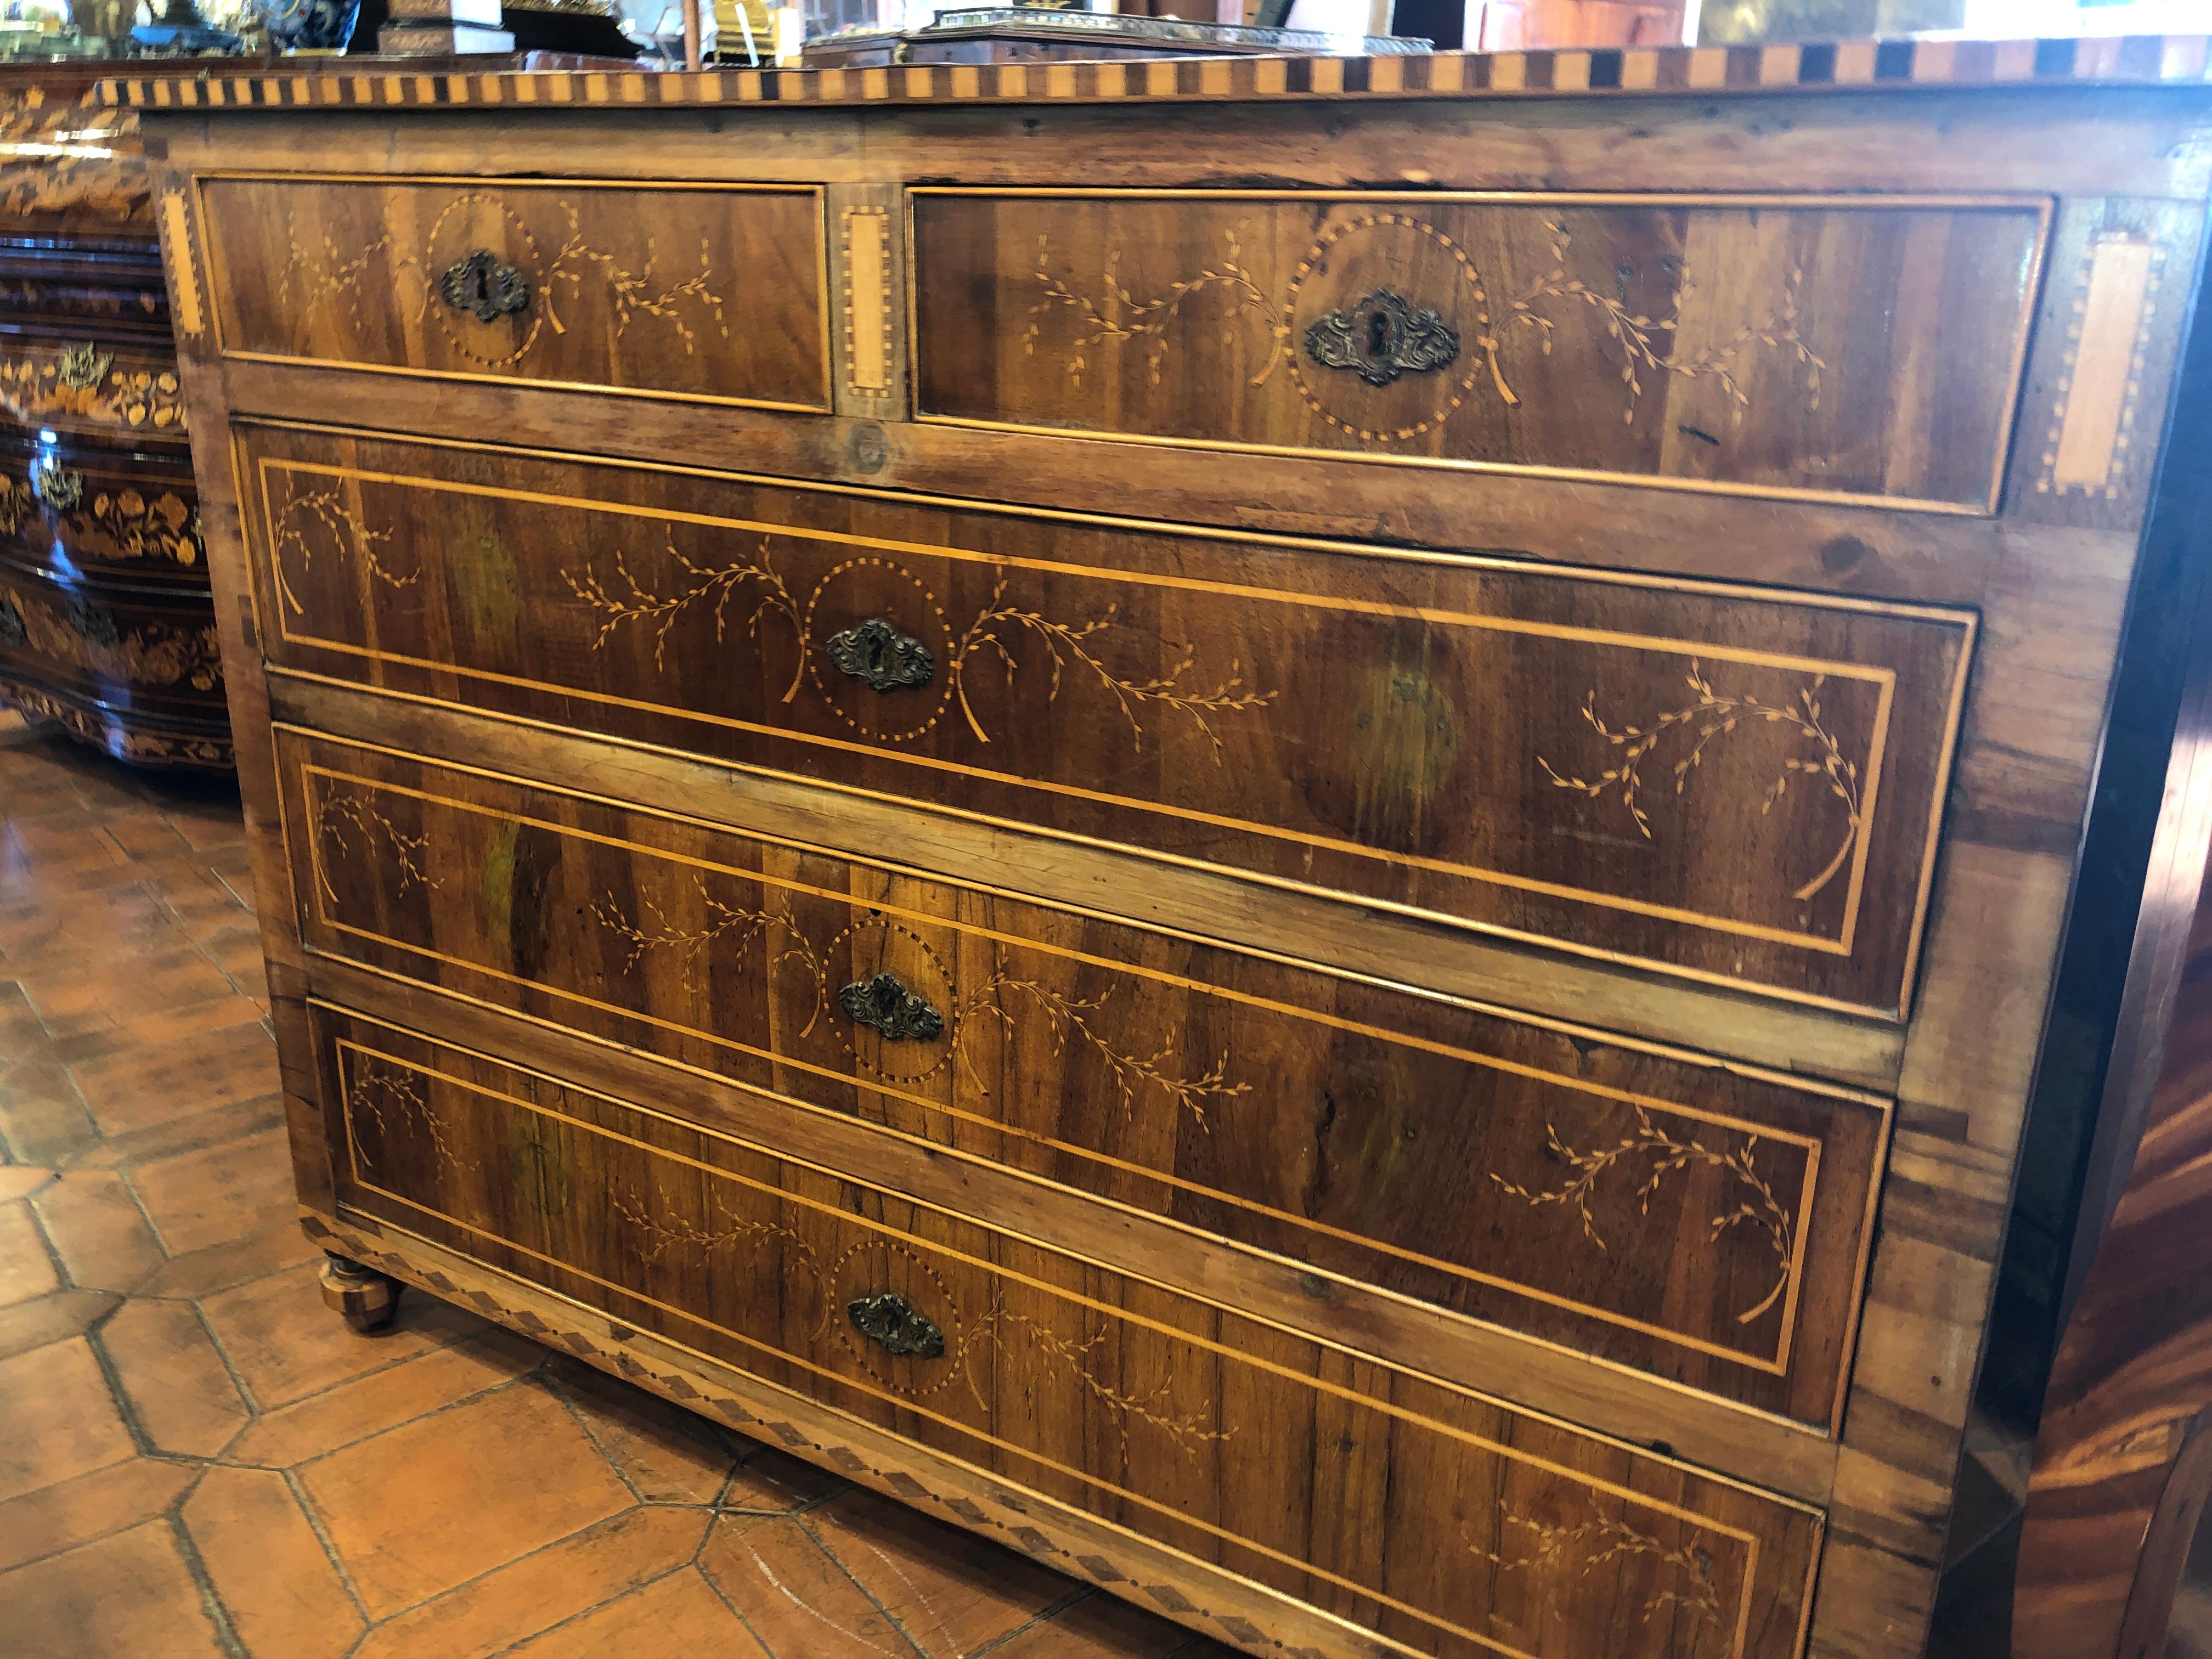 Beautiful Italian chest of drawers, from Trentino Alto Adige, you can feel the German influence in the shapes and in the line of the dresser but remain softer. Very large inside the drawers. In walnut.
Finely inlaid with floral motifs on the front,